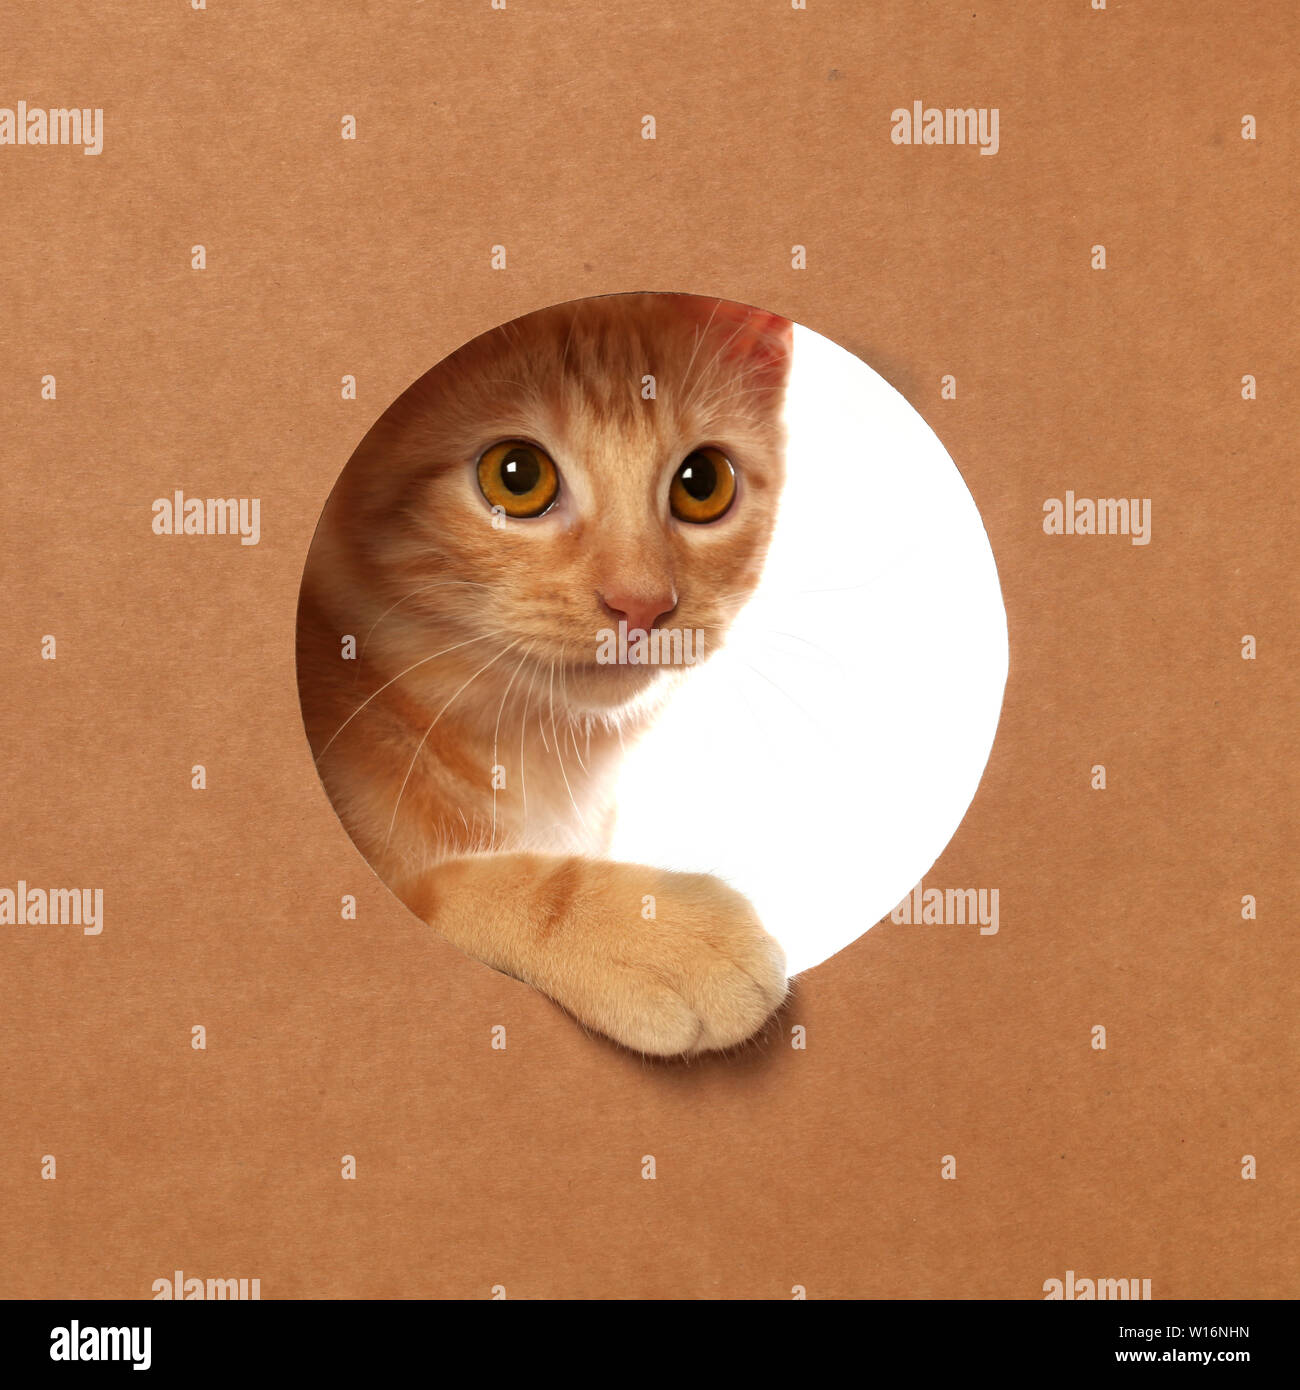 Cute little orange tabby kitten playing in a cardboard box Banque D'Images